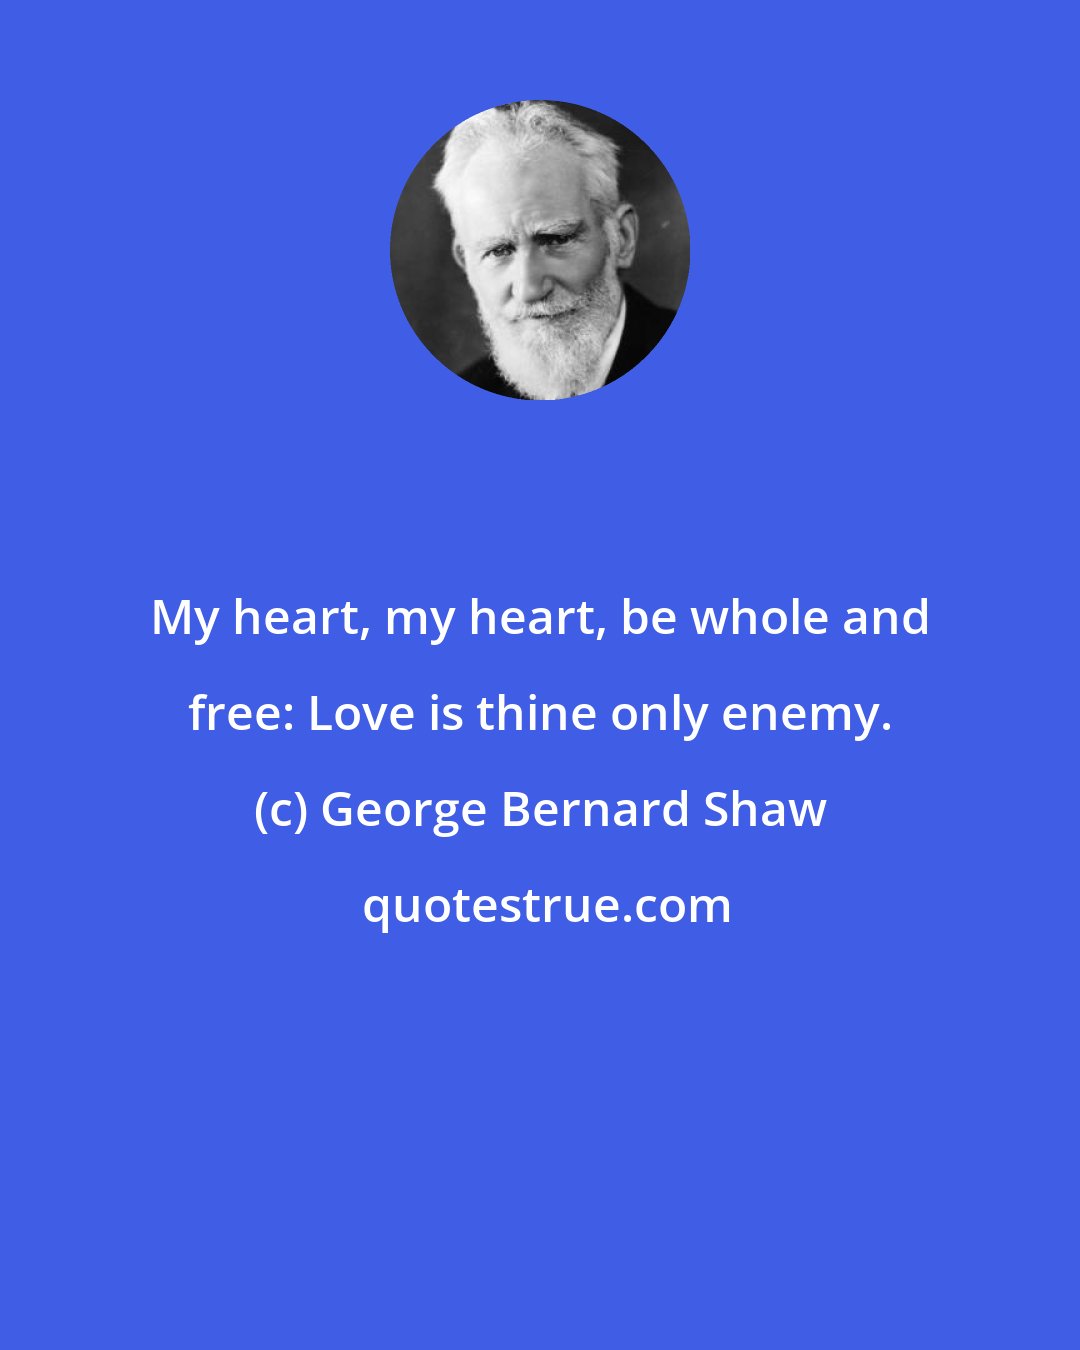 George Bernard Shaw: My heart, my heart, be whole and free: Love is thine only enemy.